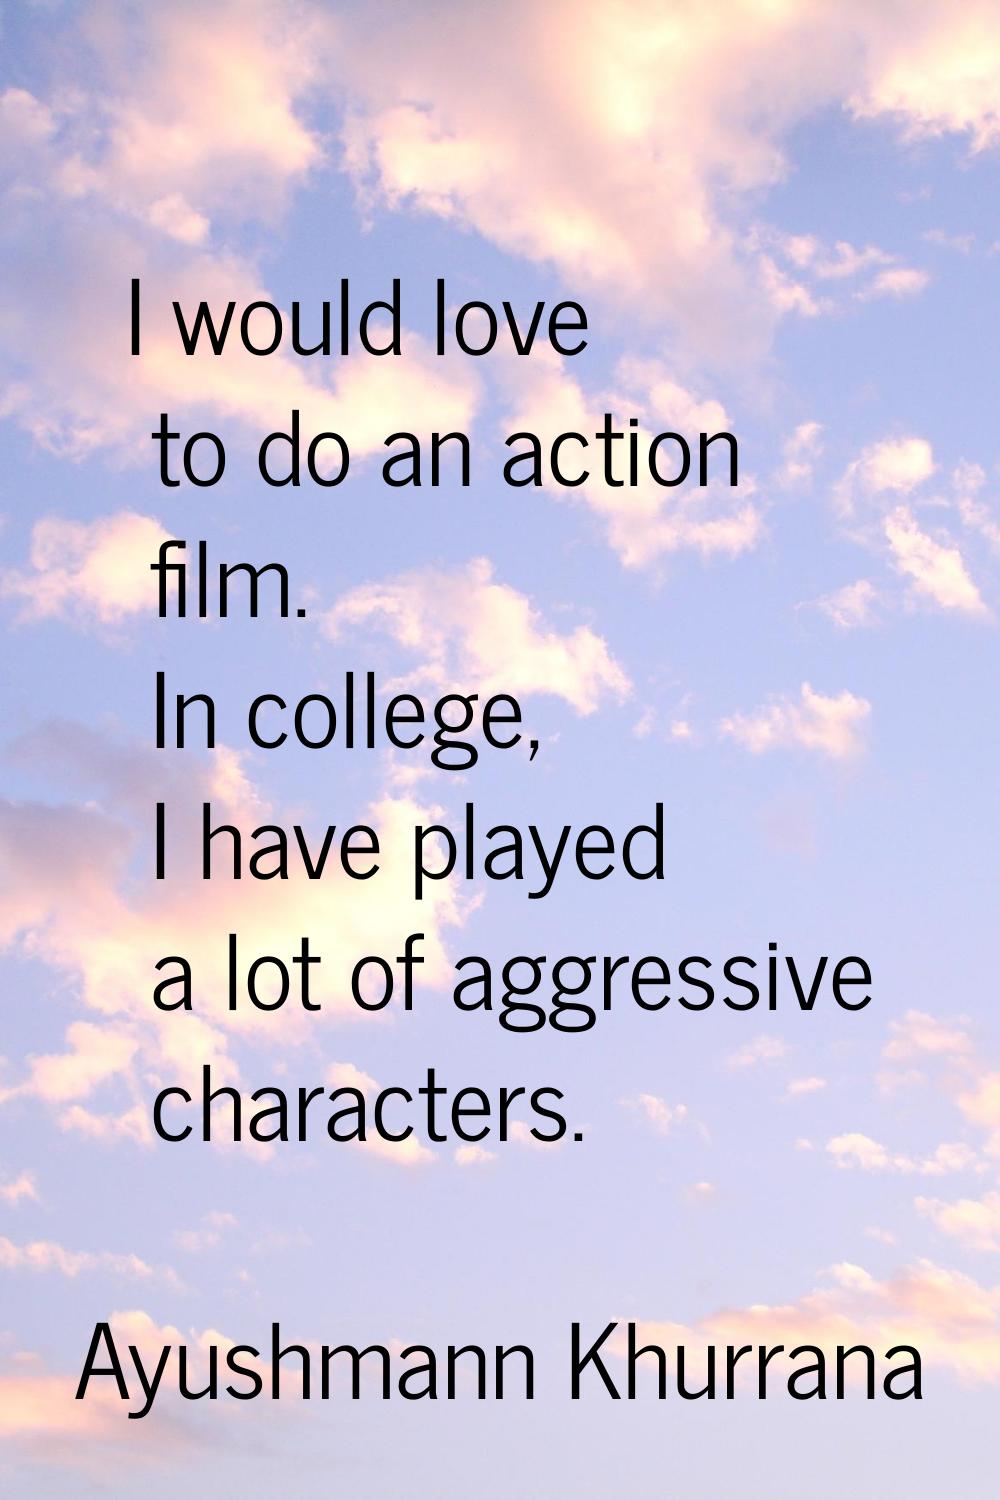 I would love to do an action film. In college, I have played a lot of aggressive characters.